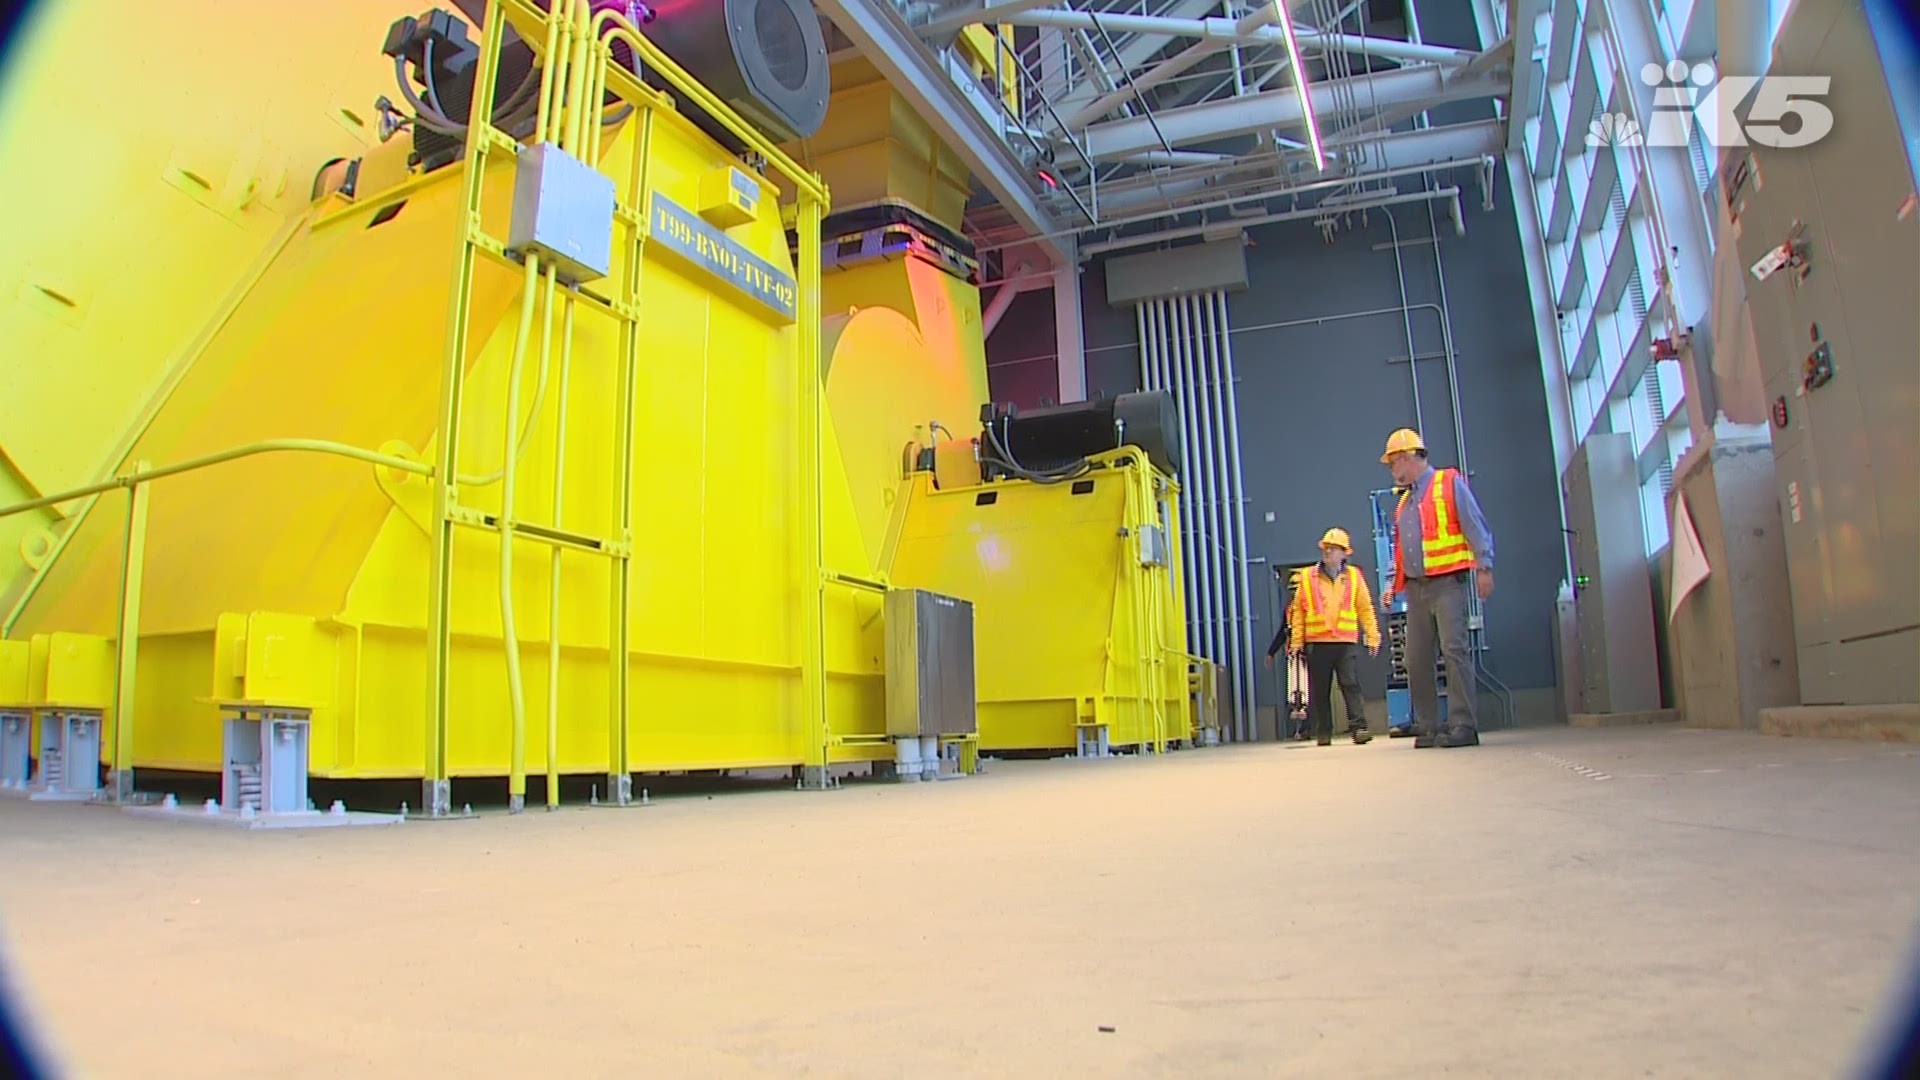 Take a sneak peek at the new Seattle tunnel before it opens.